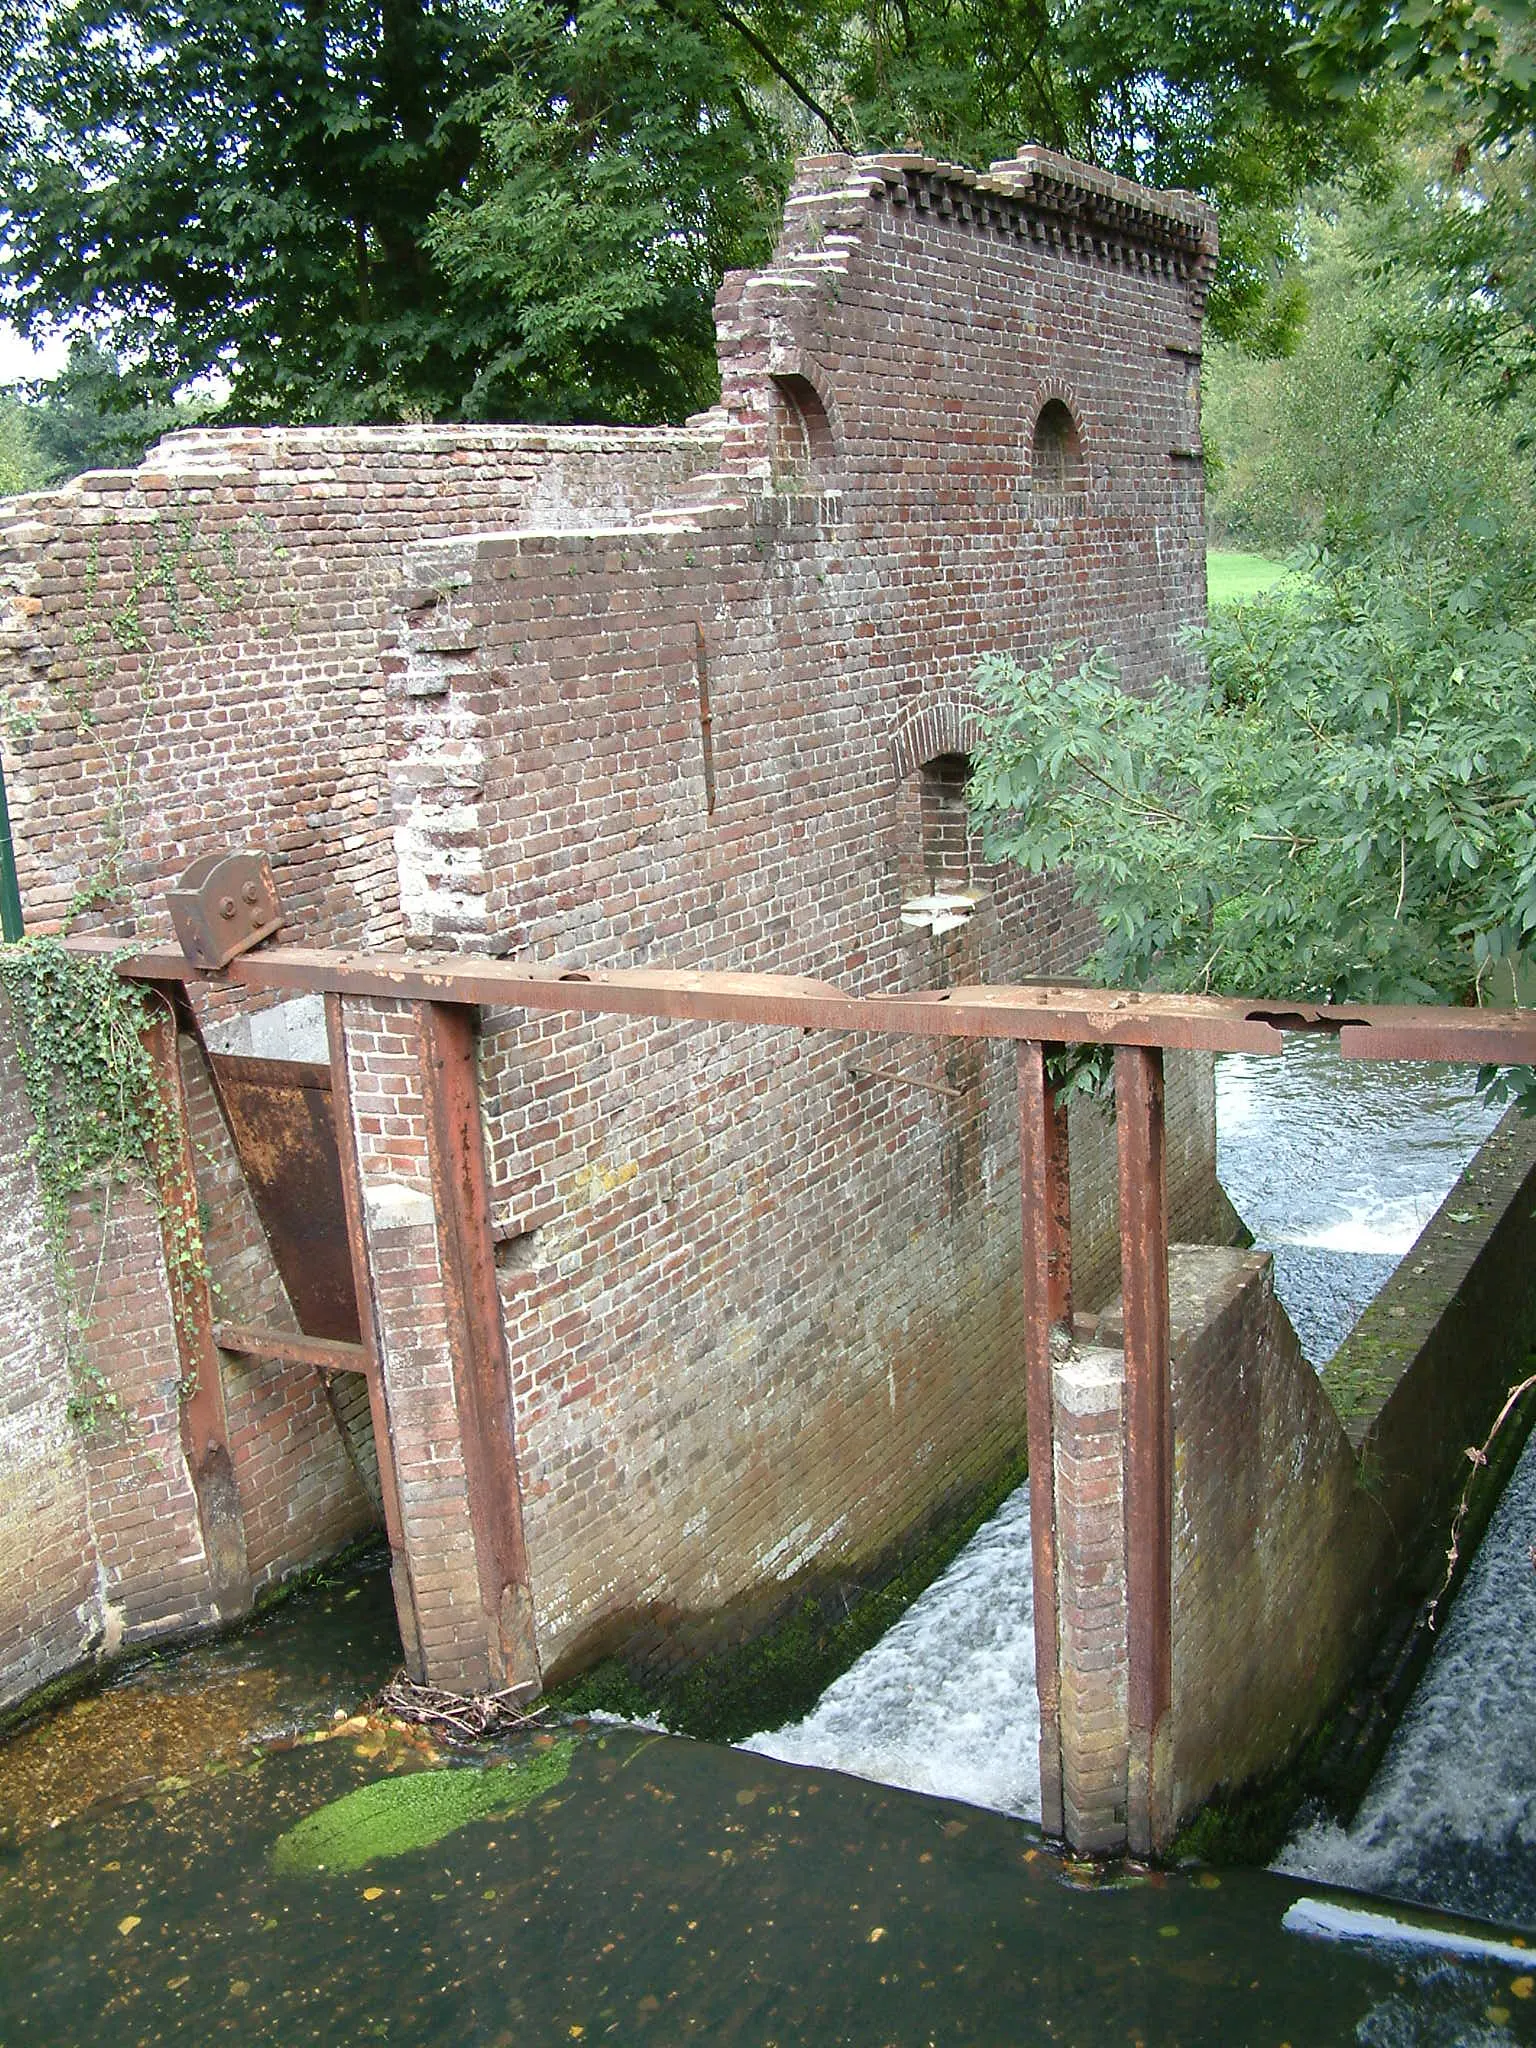 Photo showing: Remains of the St. Elisabeth Watermill in Haelen, The Netherlands